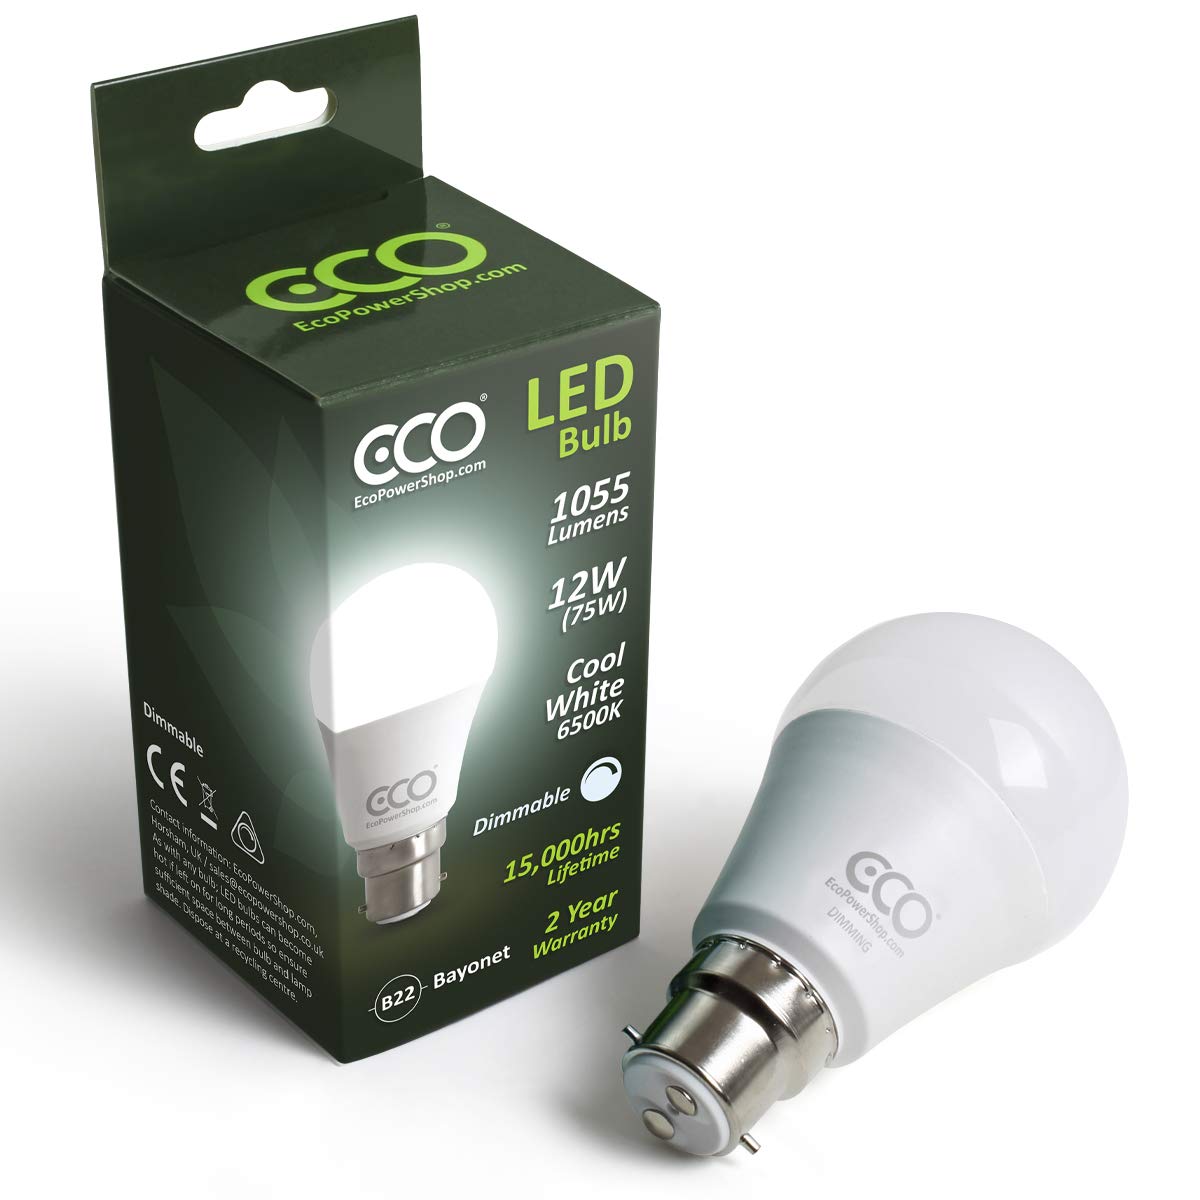 ECO DIMMABLE 2 Pin B22 Bayonet Light Bulb, 12W Dimmable LED Energy Saving Light Bulb, 75W Equivalent, Frosted, Cool White (6500K), 15000Hrs (Cool White (6500K), 1 x Pack)